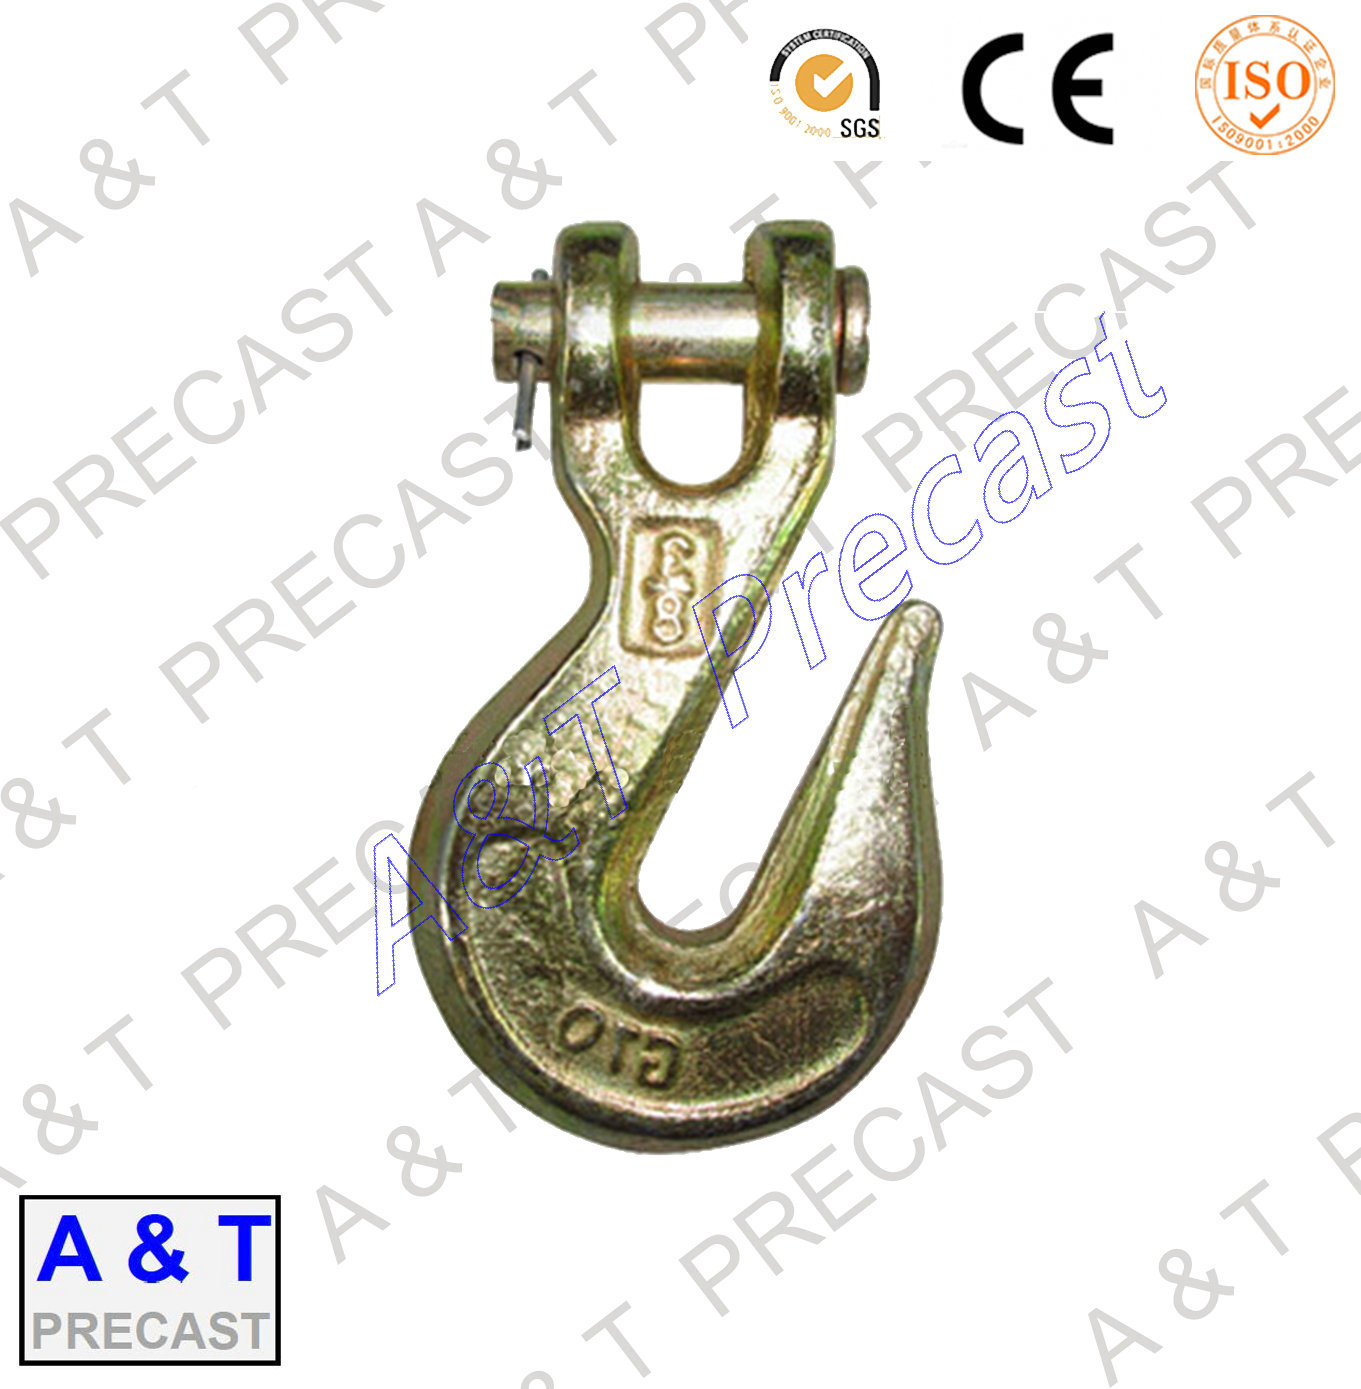 Carbon Steel/Stainless Steel Clevis Grab Hanging Hooks